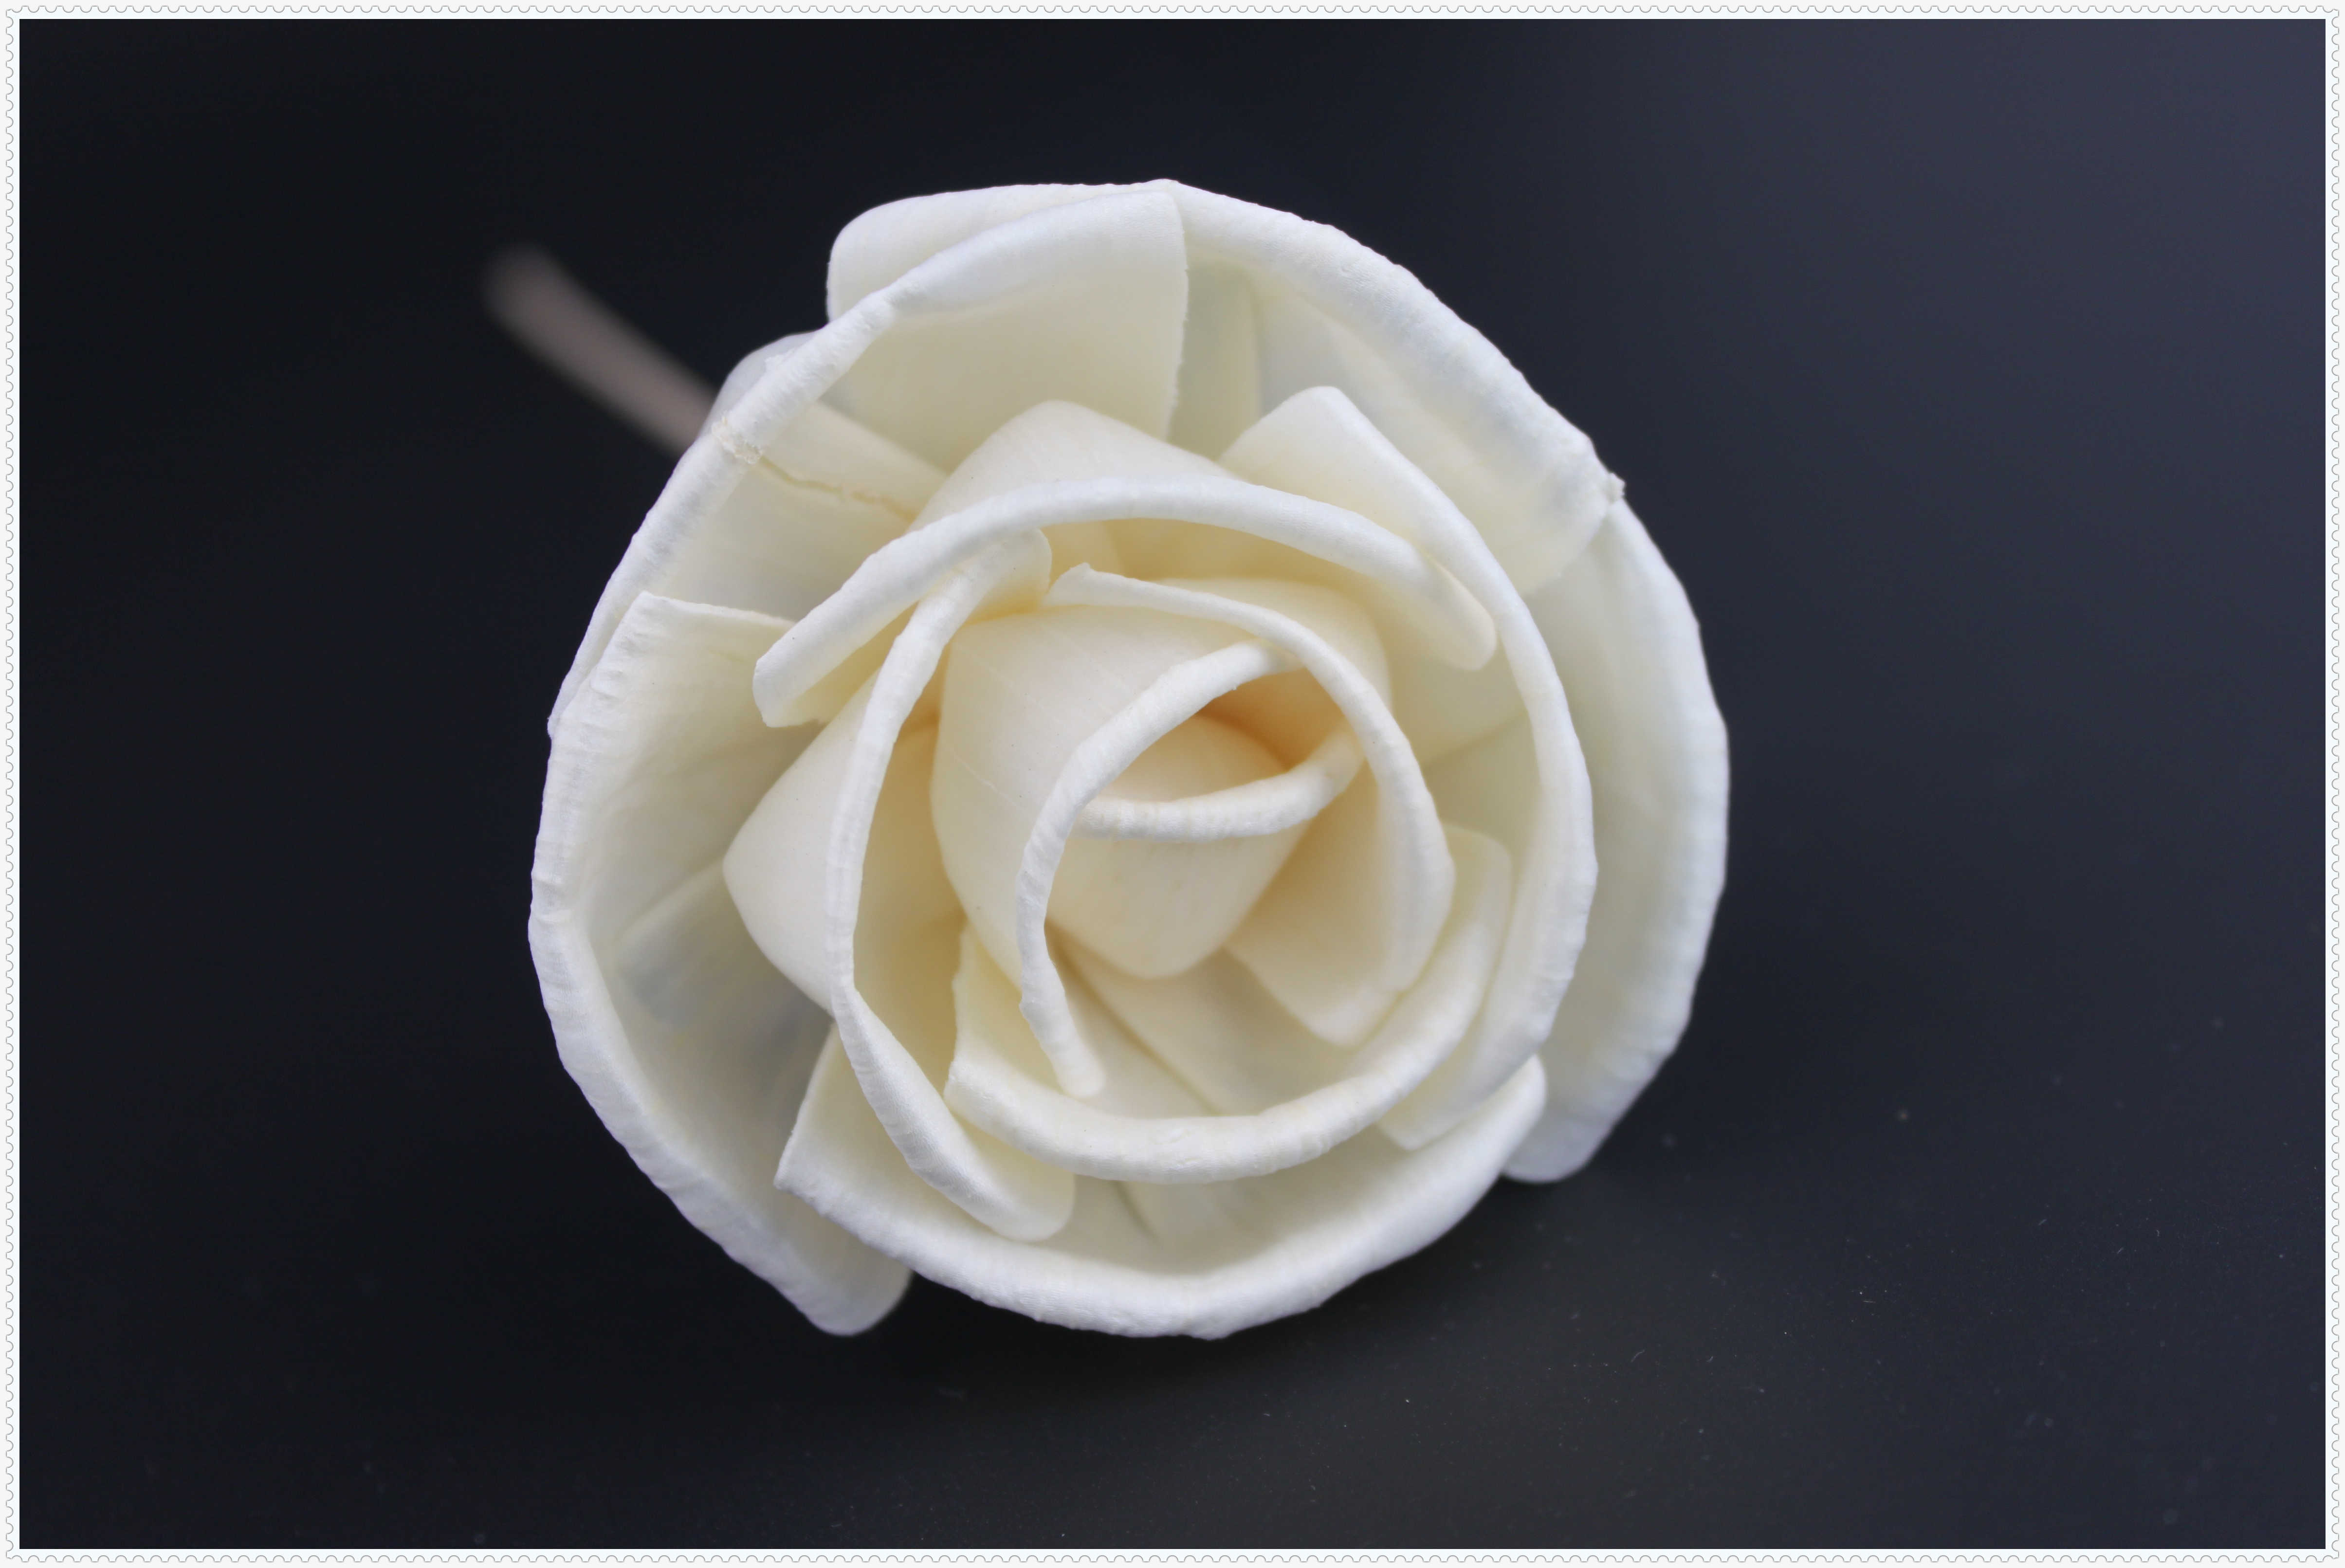 Pink / White Rose 10cm Fragrance Diffuser Dried Dried Sola Flowers For Office